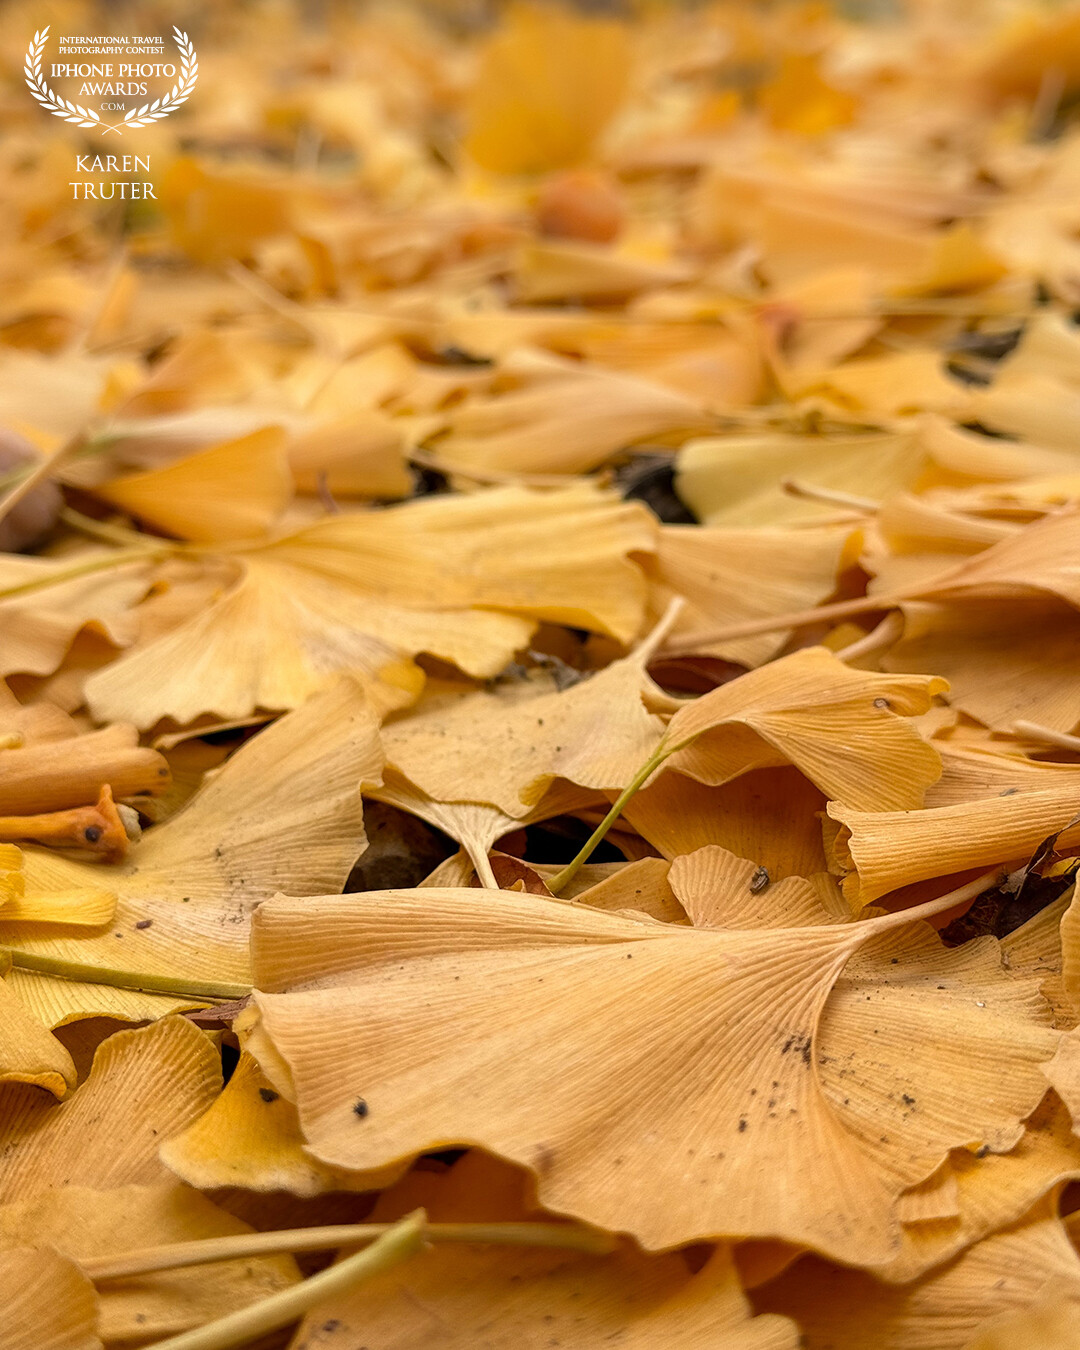 I call this photo “Carpet of Gingko” in late fall and after a cold snap, the leaves dropped overnight from the trees causing a golden carpet of subtle colour and texture.